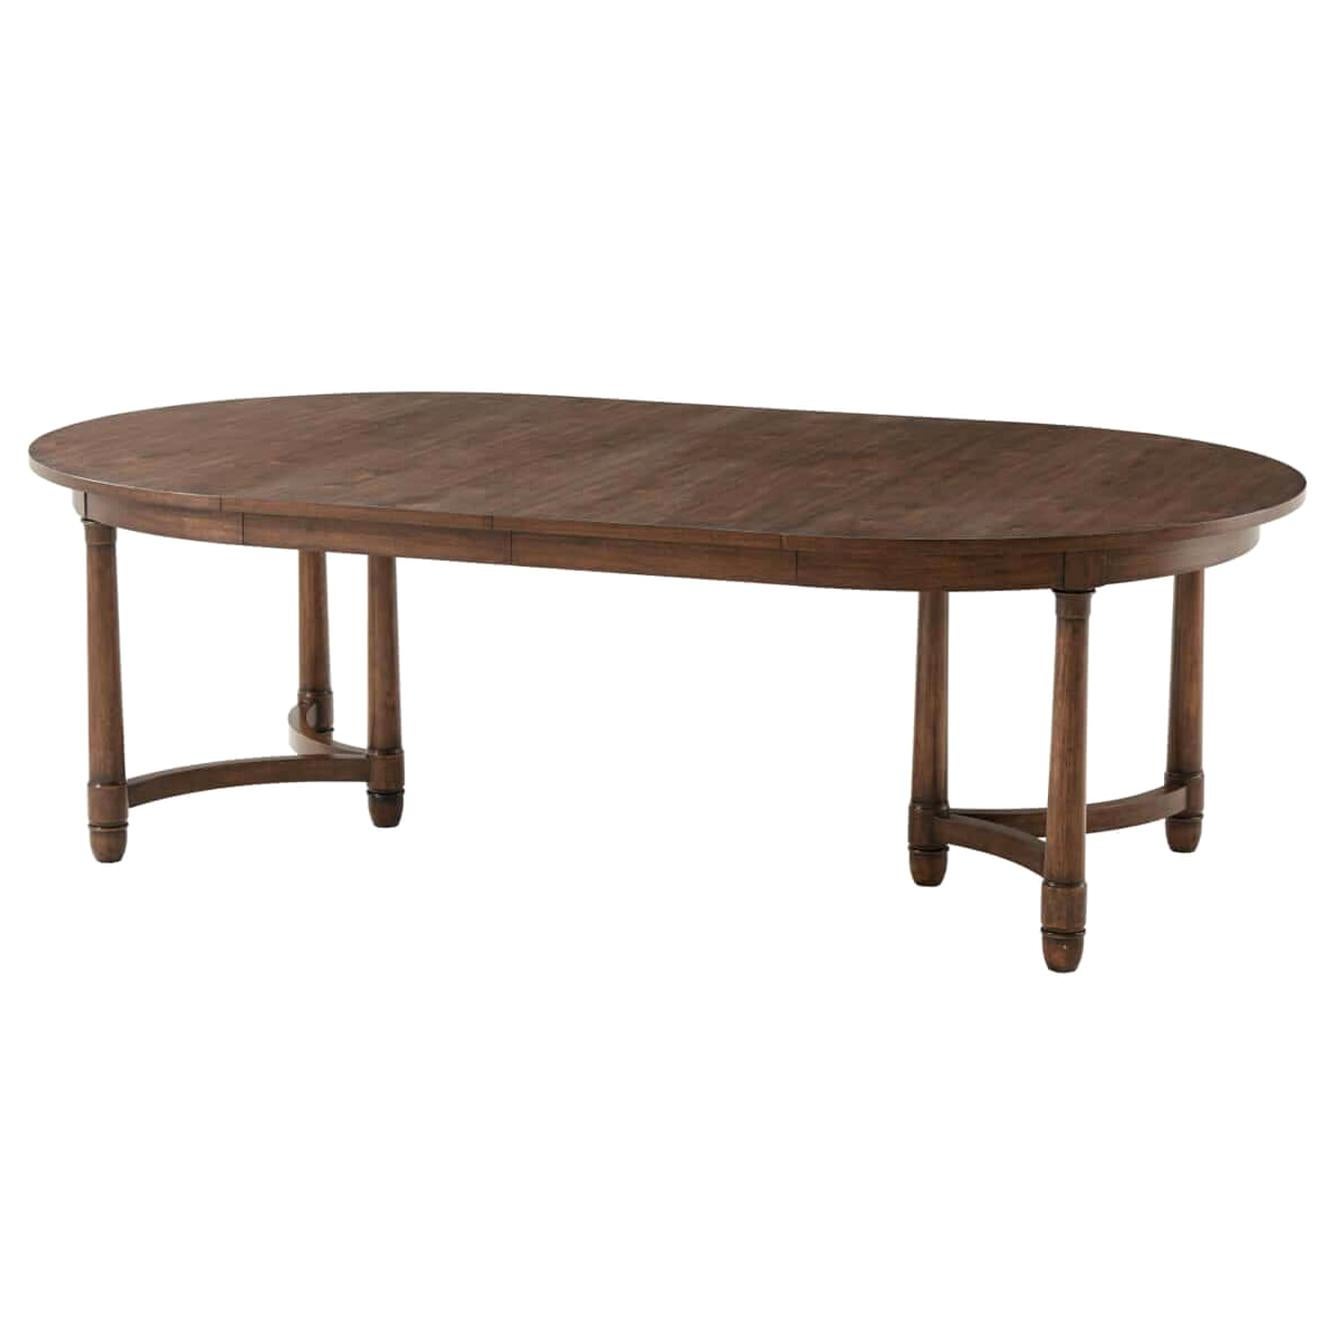 Empire Style Extending Dining Table